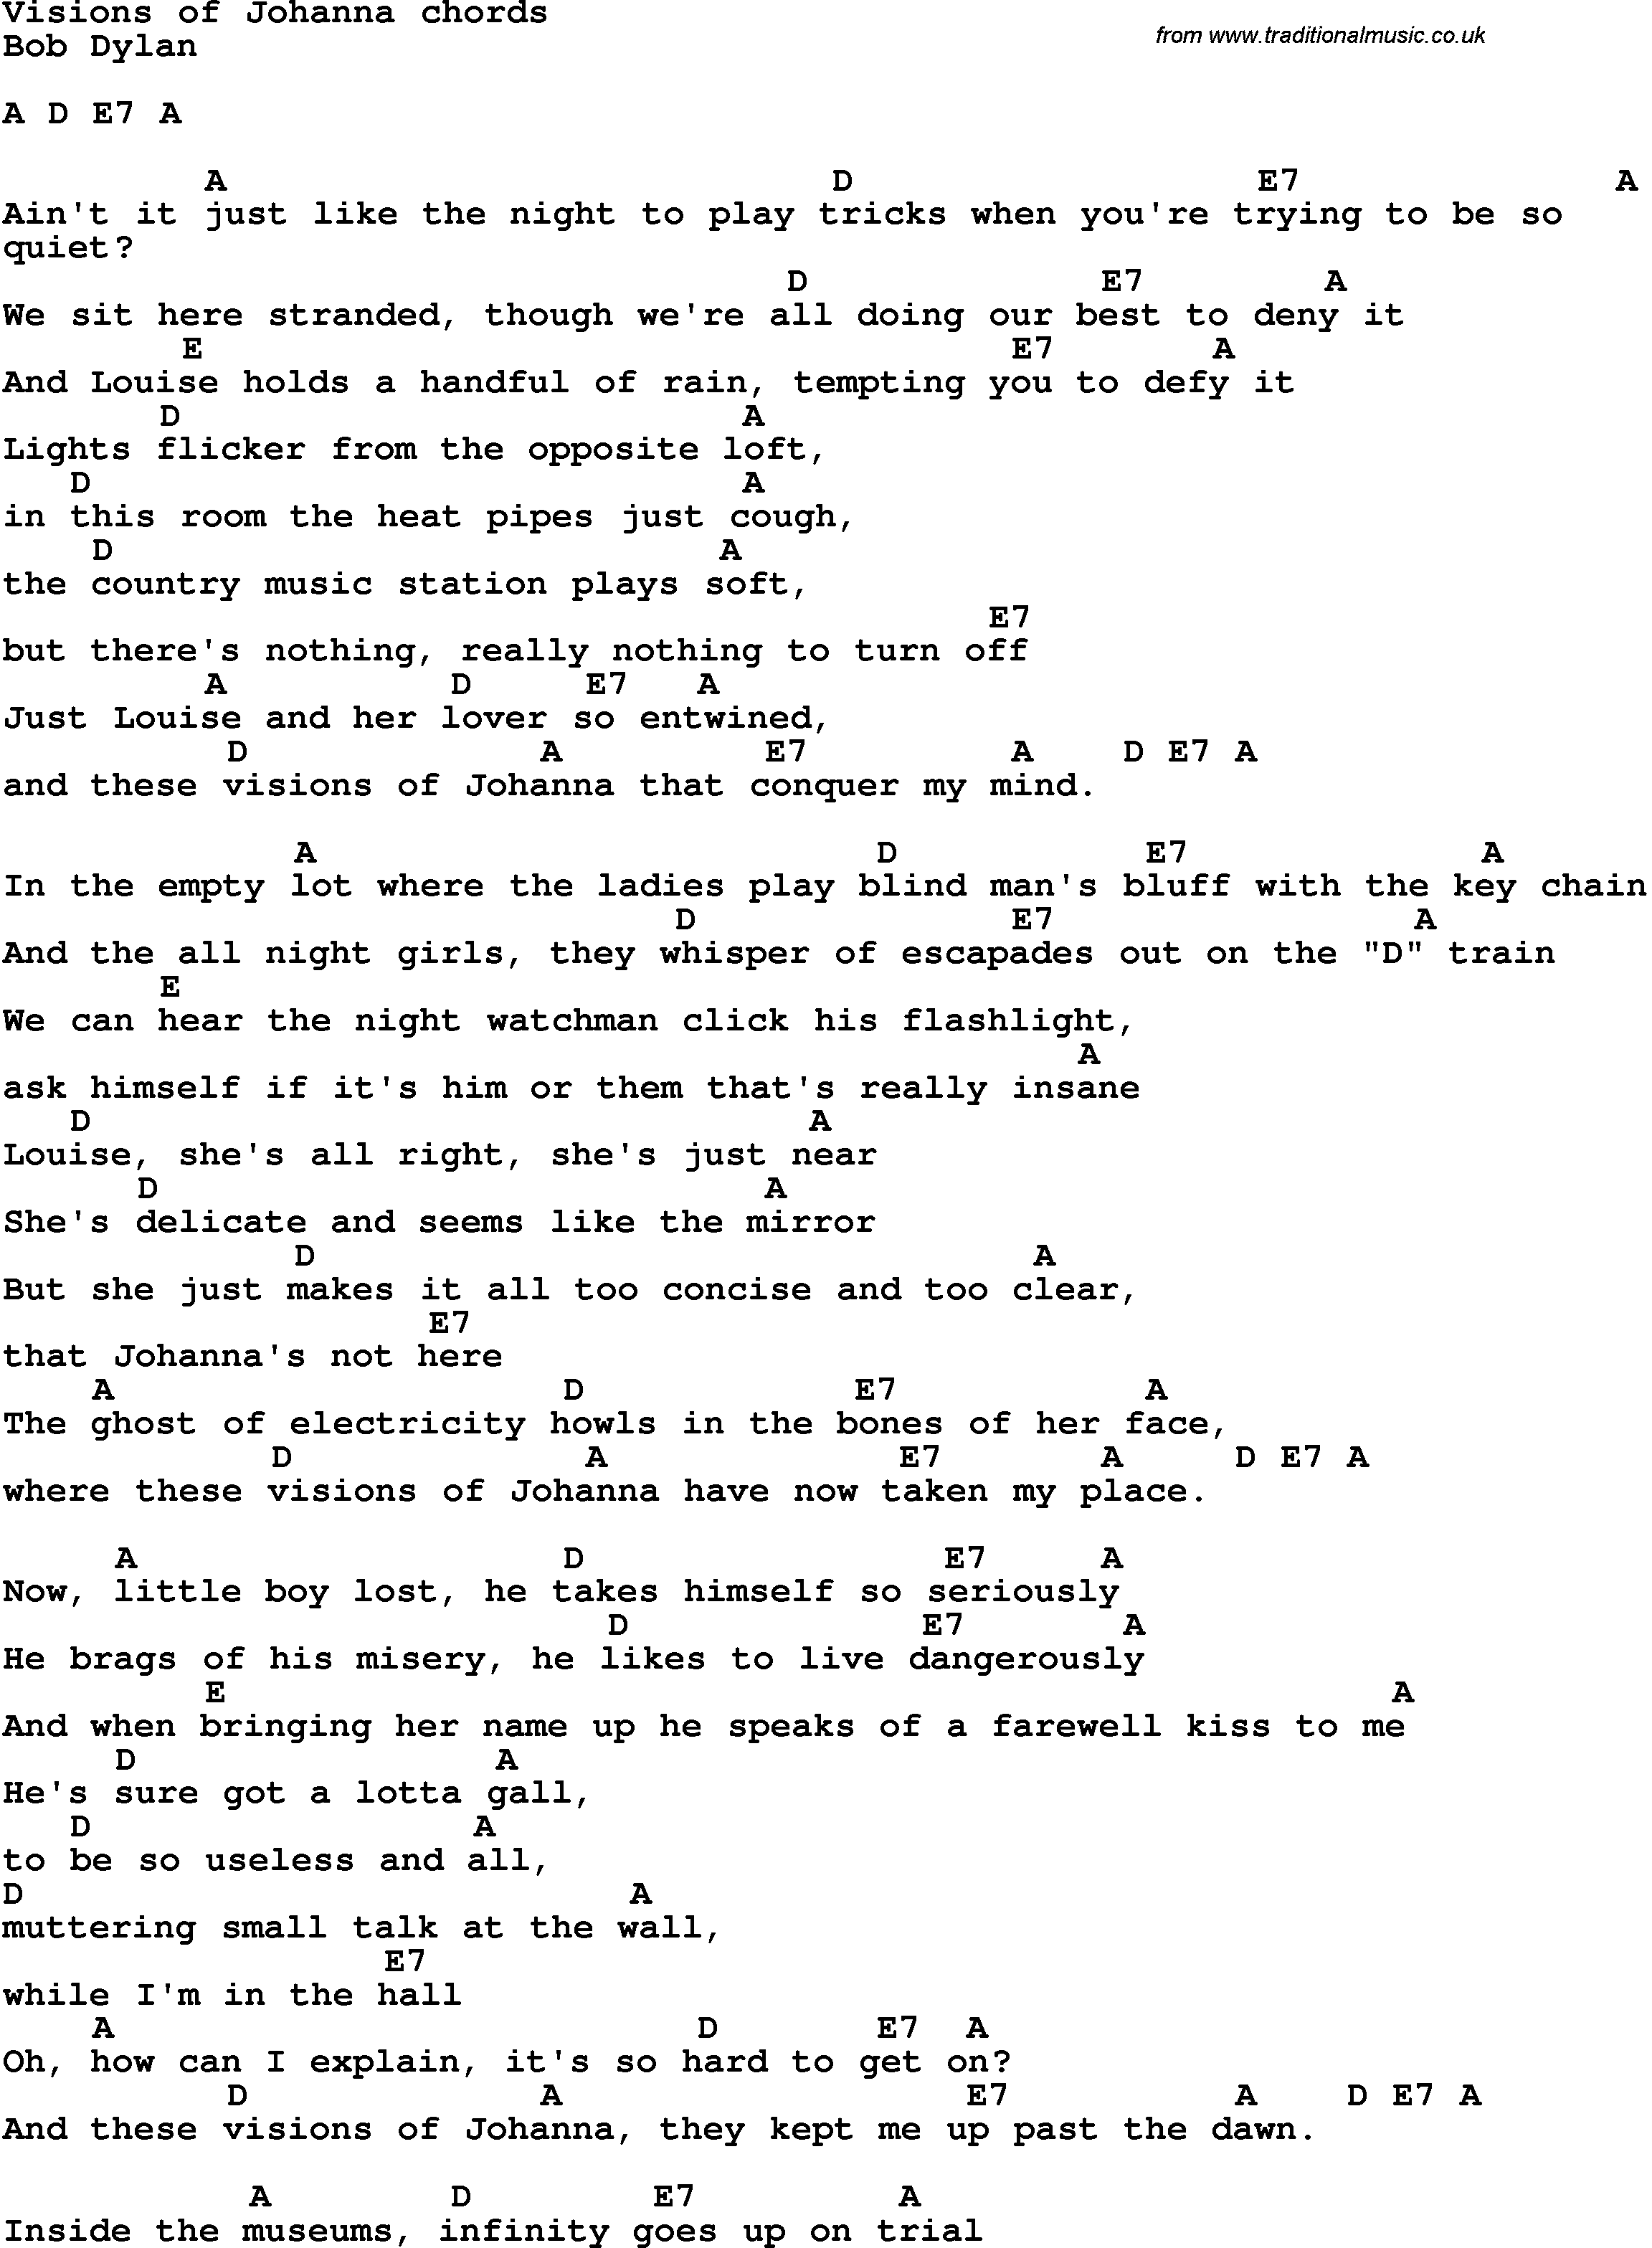 Song Lyrics with guitar chords for Visions Of Johanna